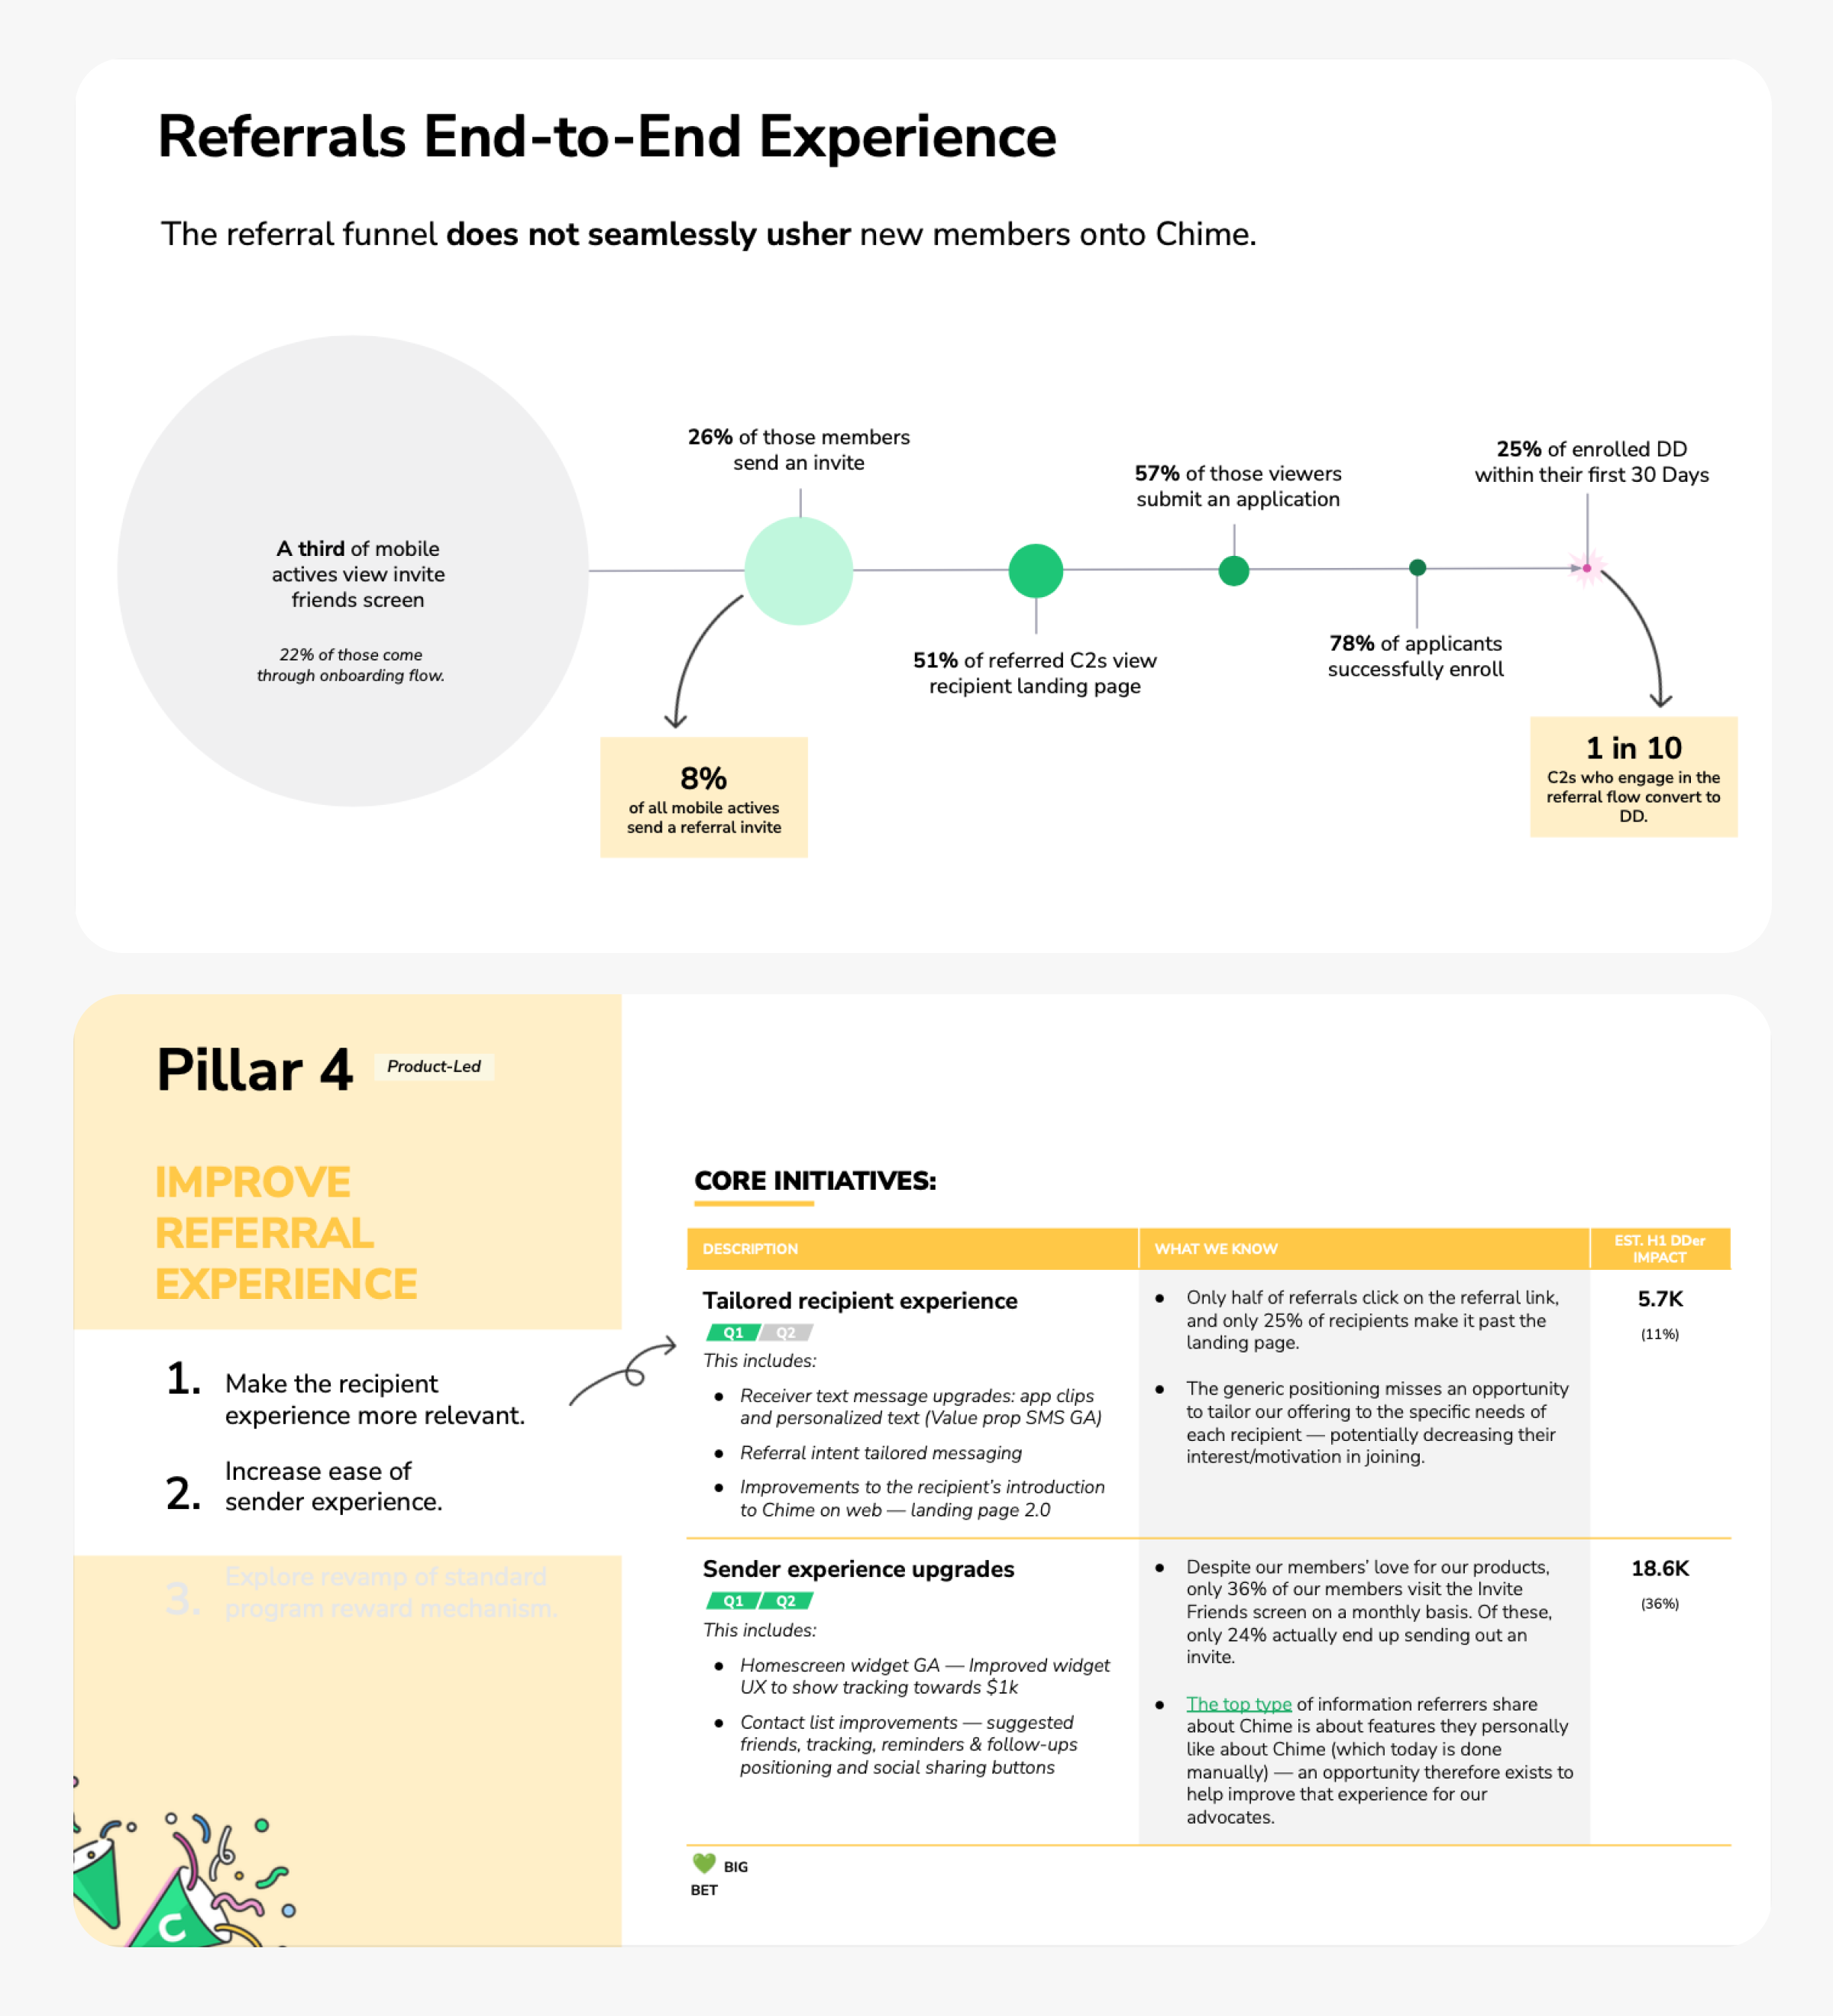 Planning assets for referral experience updates